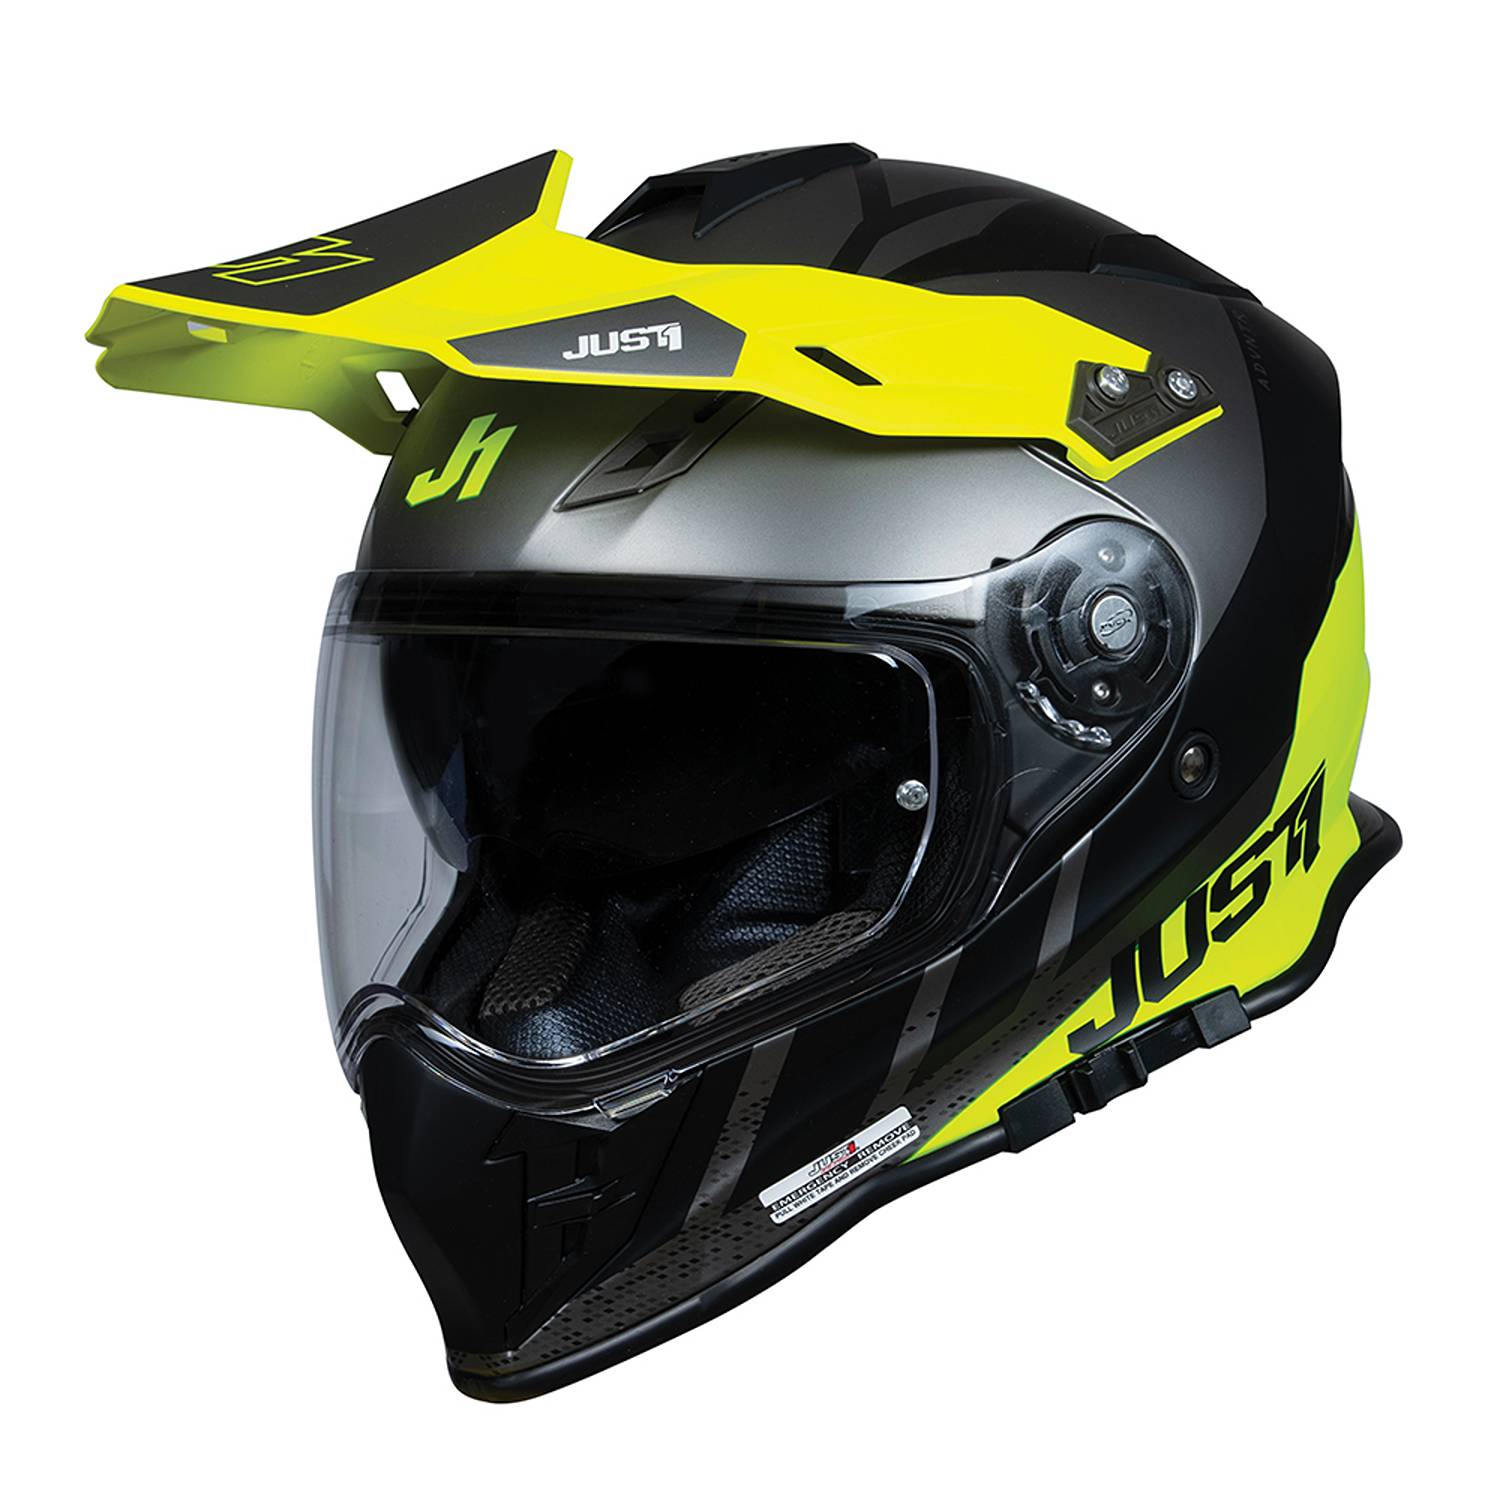 Image of Just1 J34 Pro Outerspace Yellow Fluo Titanium Adventure Helmet Size S ID 8055774027939